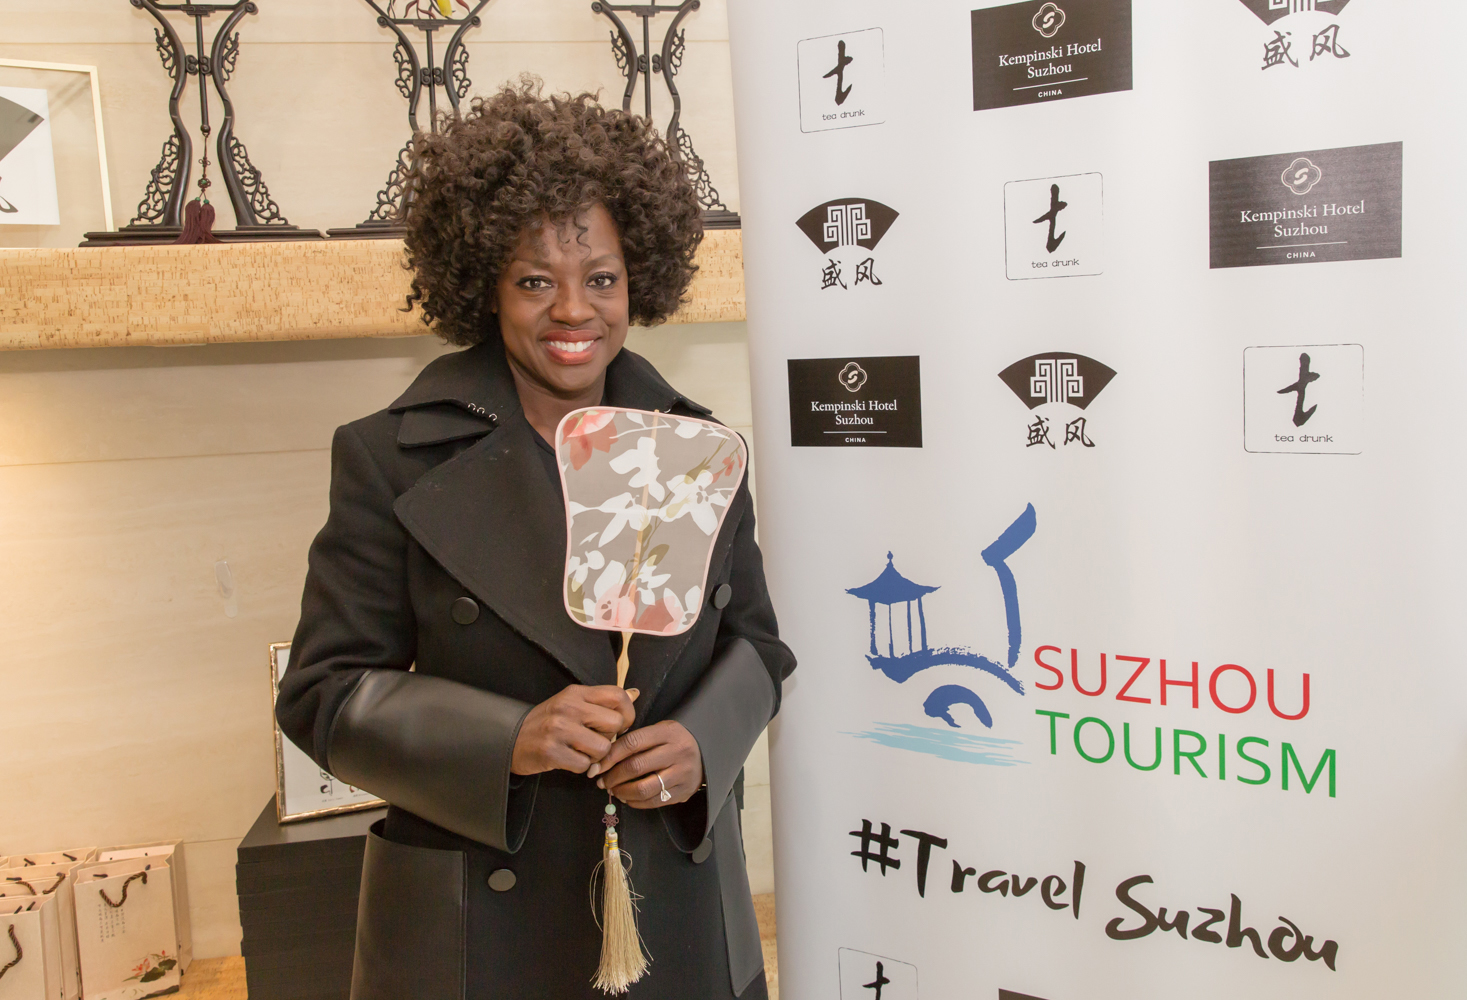 2017 Oscar winner Viola Davis learns about Suzhou and picks up a Sheng Feng fan at GBK Productions’ Luxury Gifting Lounge held February 22 - 23 in Beverly Hills.